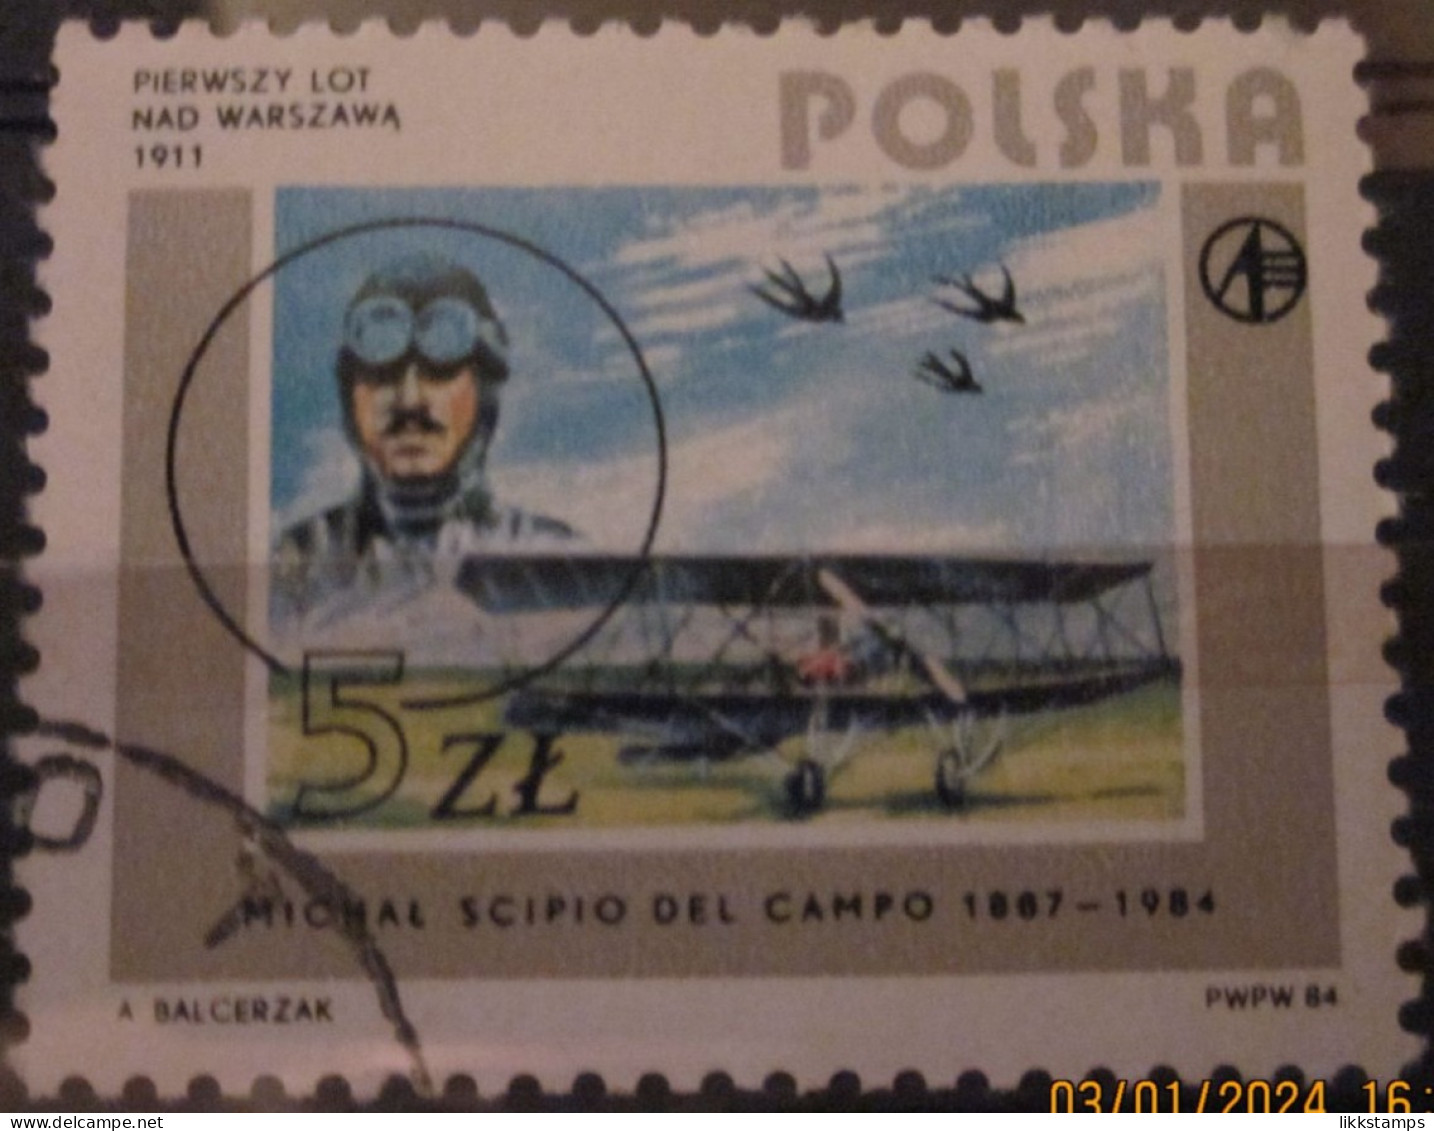 POLAND ~ 1984 ~ S.G. NUMBERS S.G. 2956. ~ POLISH AVIATION ~ VFU #03526 - Used Stamps